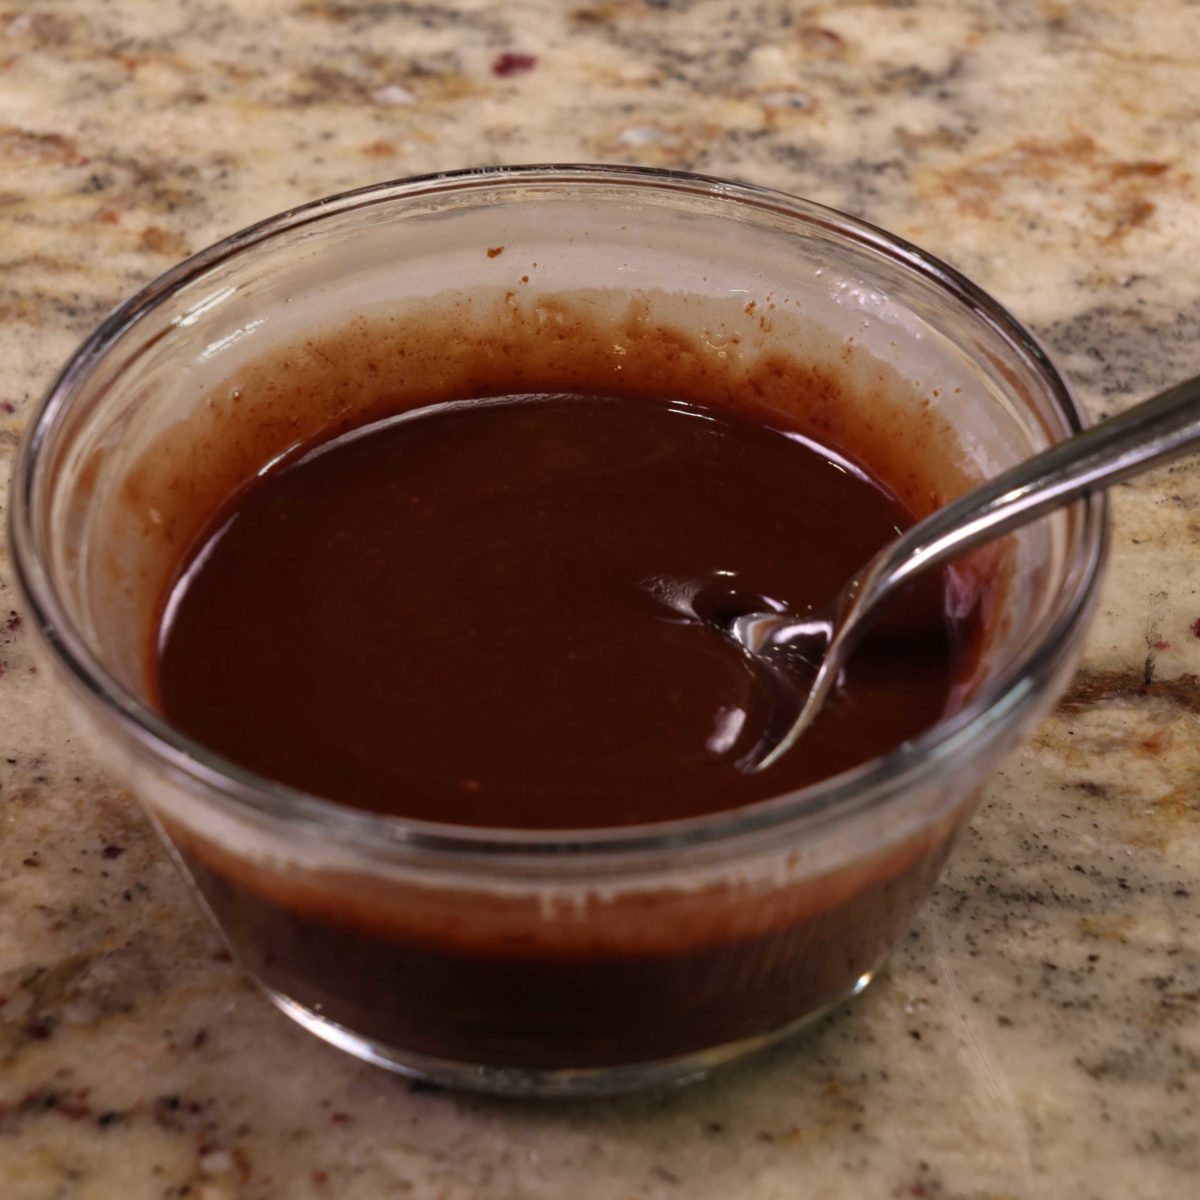 melted chocolate in a small glass bowl